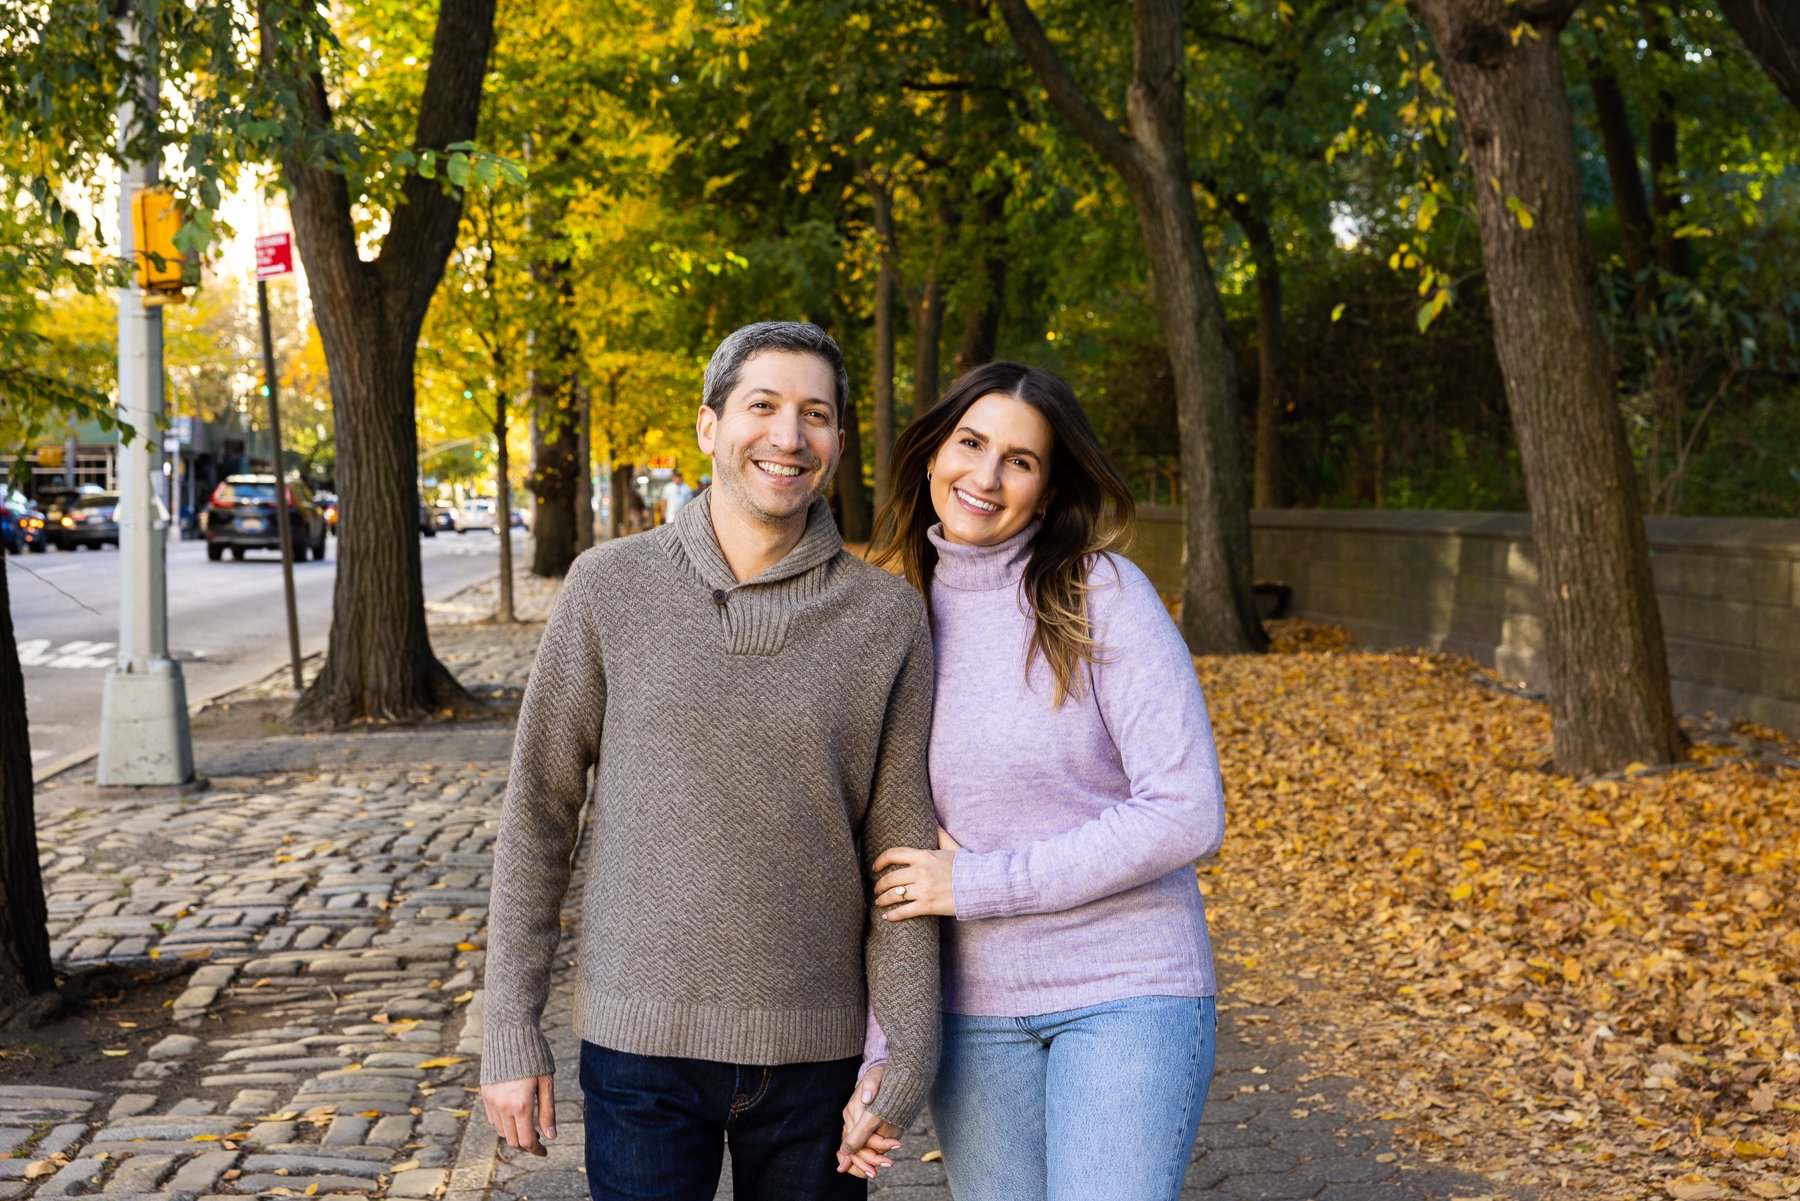 Central Park NYC Fall Foliage Engagement Session_1190.jpg